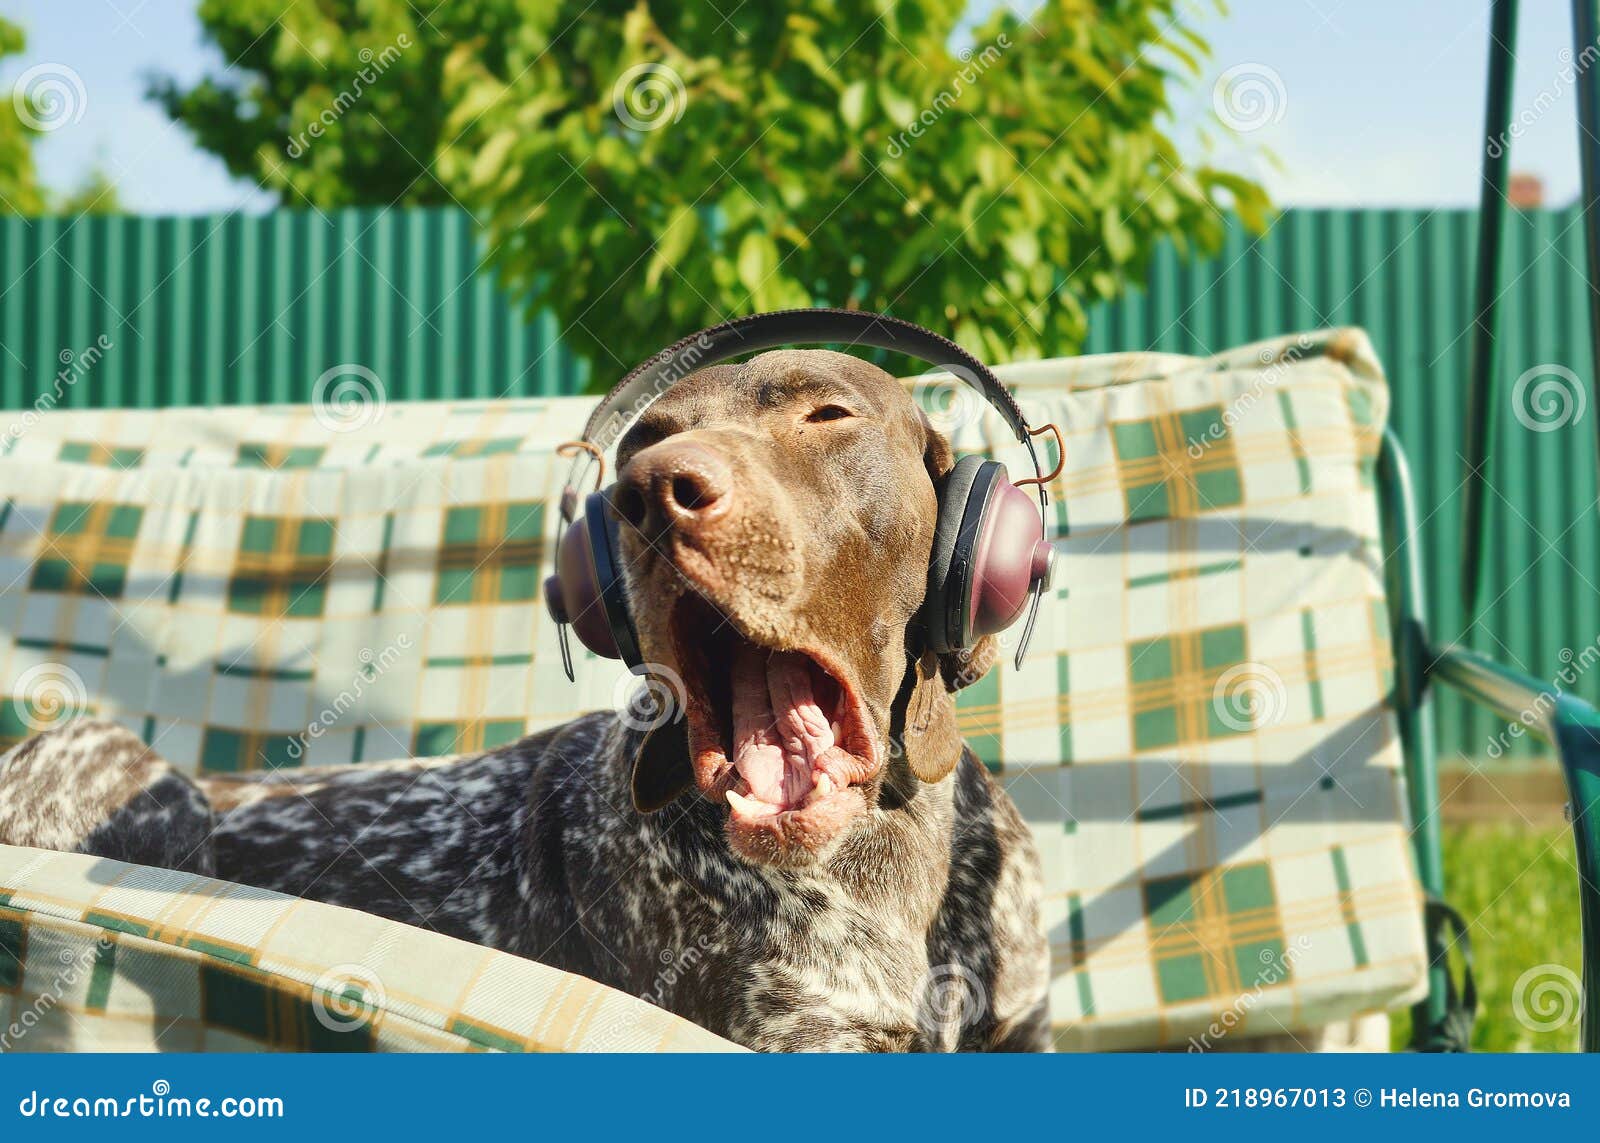 Dog Listening To Music in Earphones. Summer Time. Entetainment Background.  Relaxing Moment. Funny Animals Stock Image - Image of mammal, relaxing:  218967013